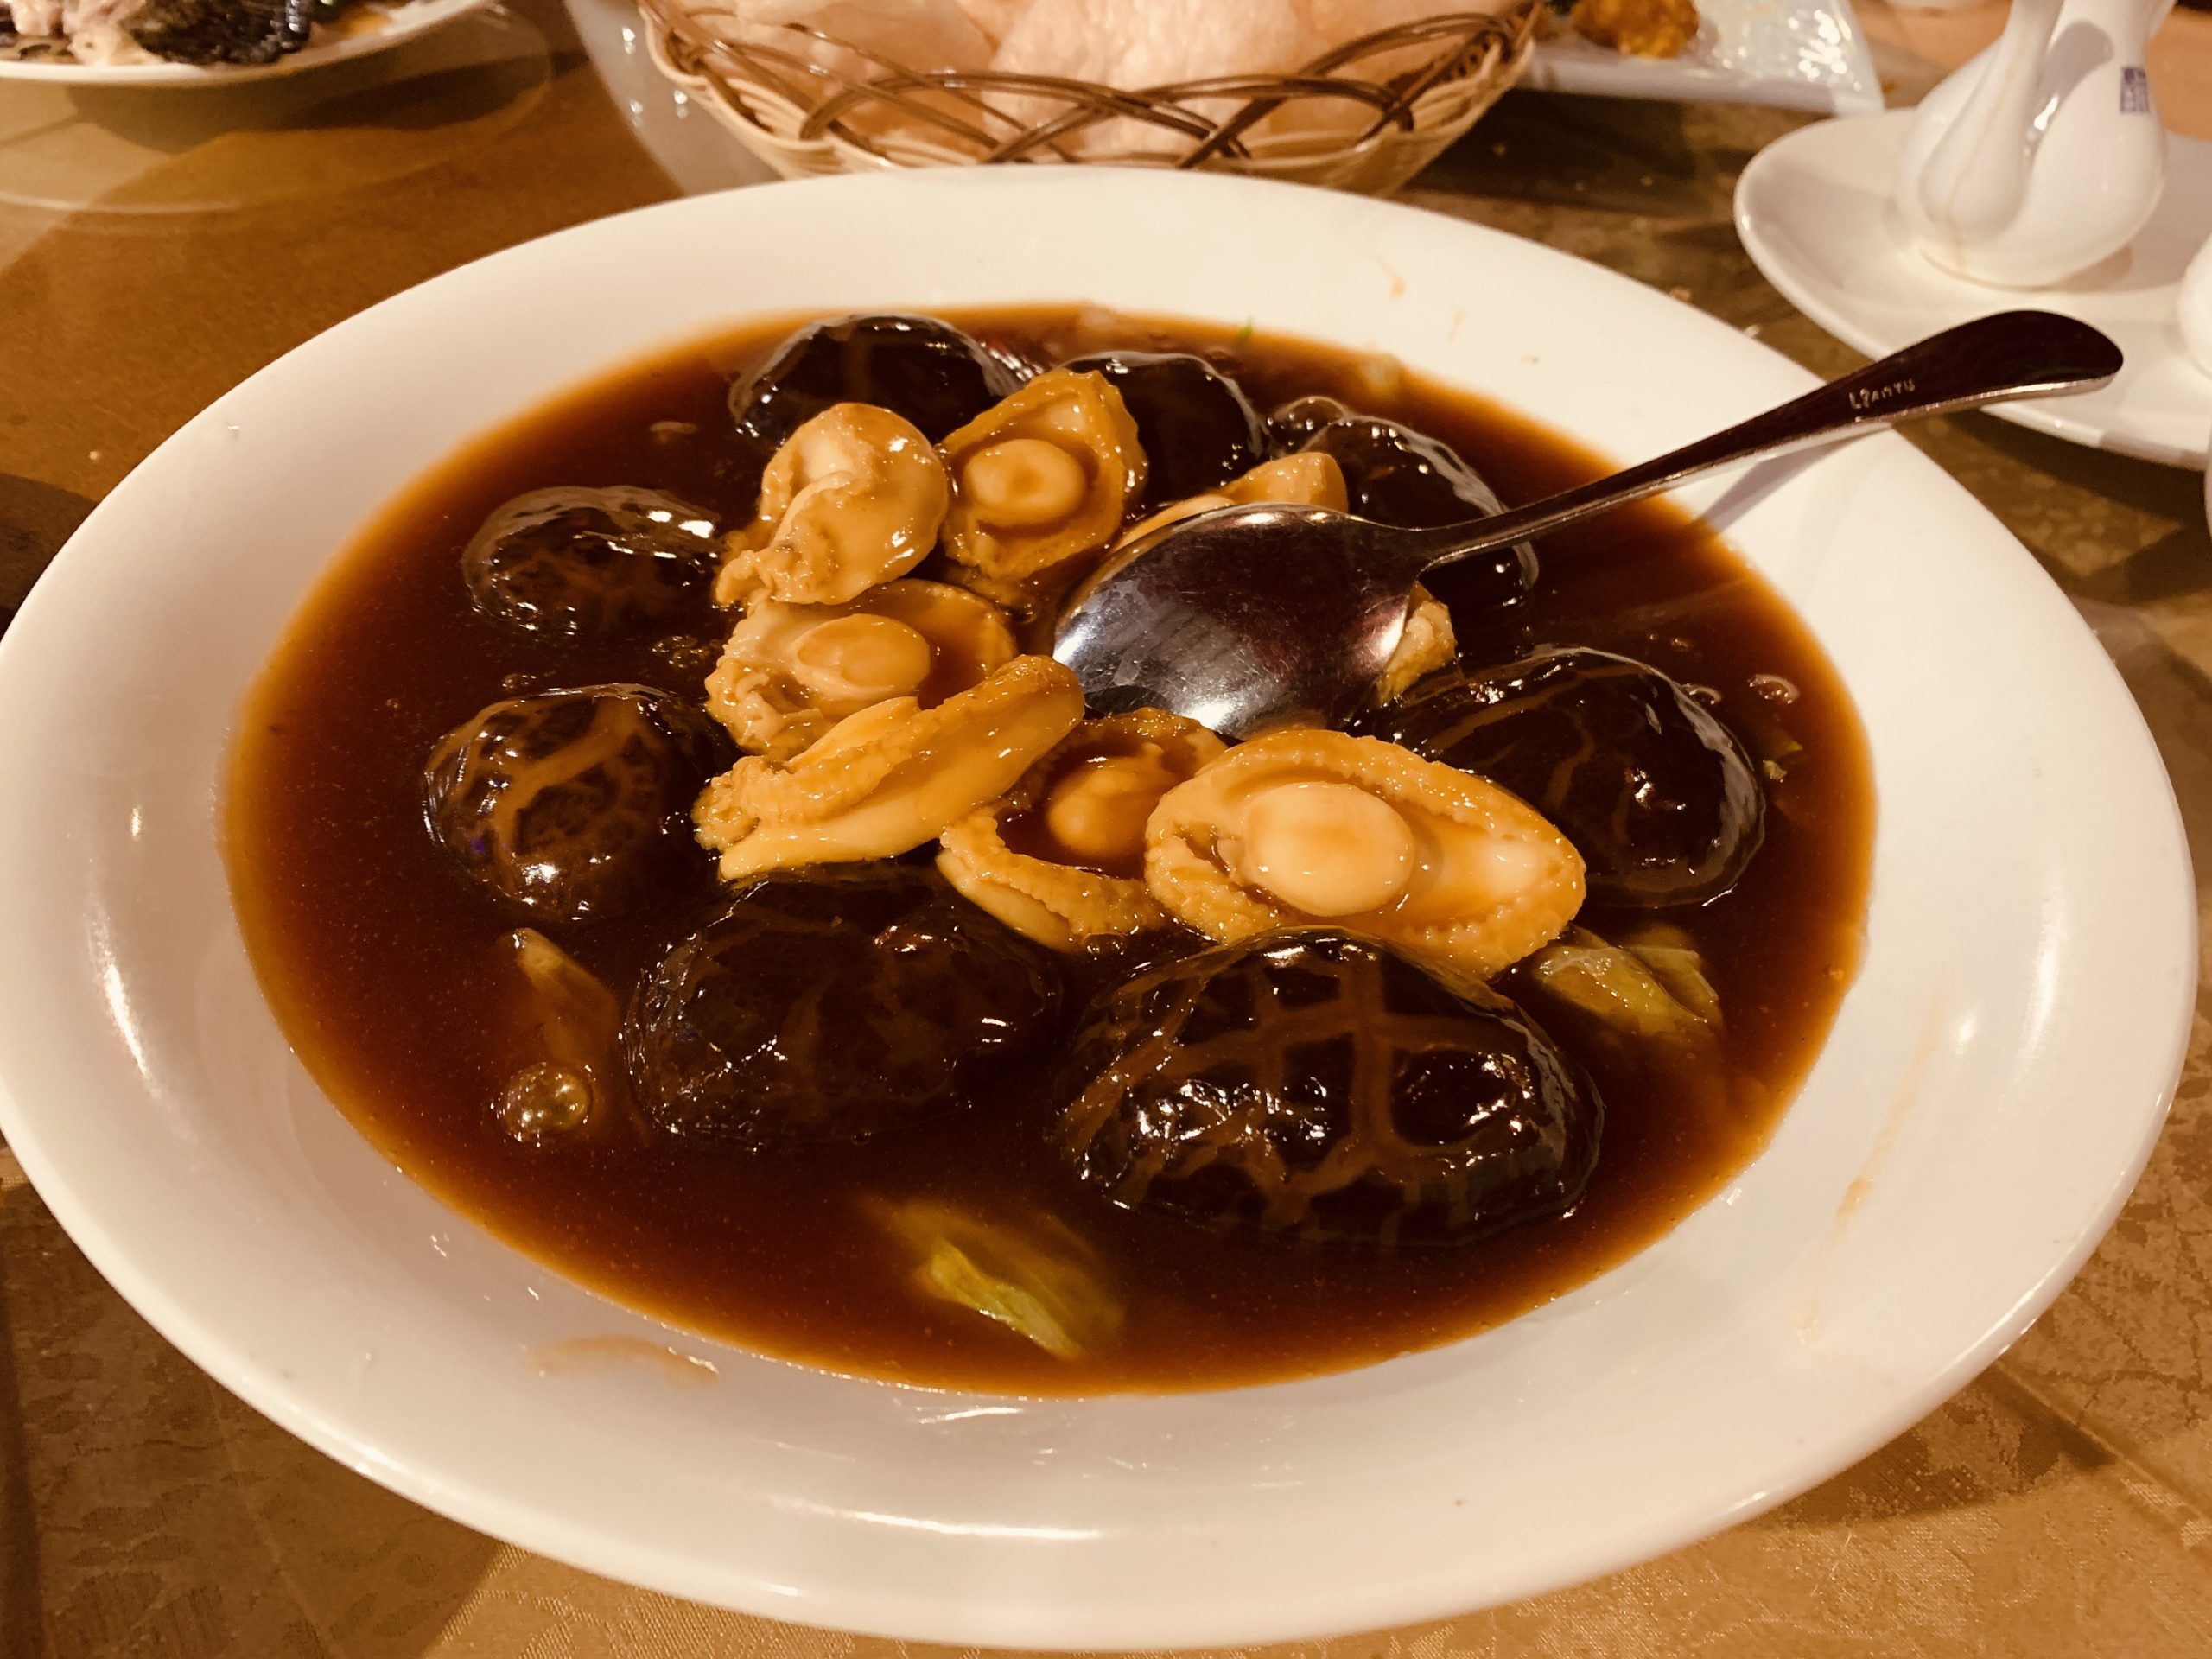 Tasty Loong - Braised Baby Abalone with Mushroom